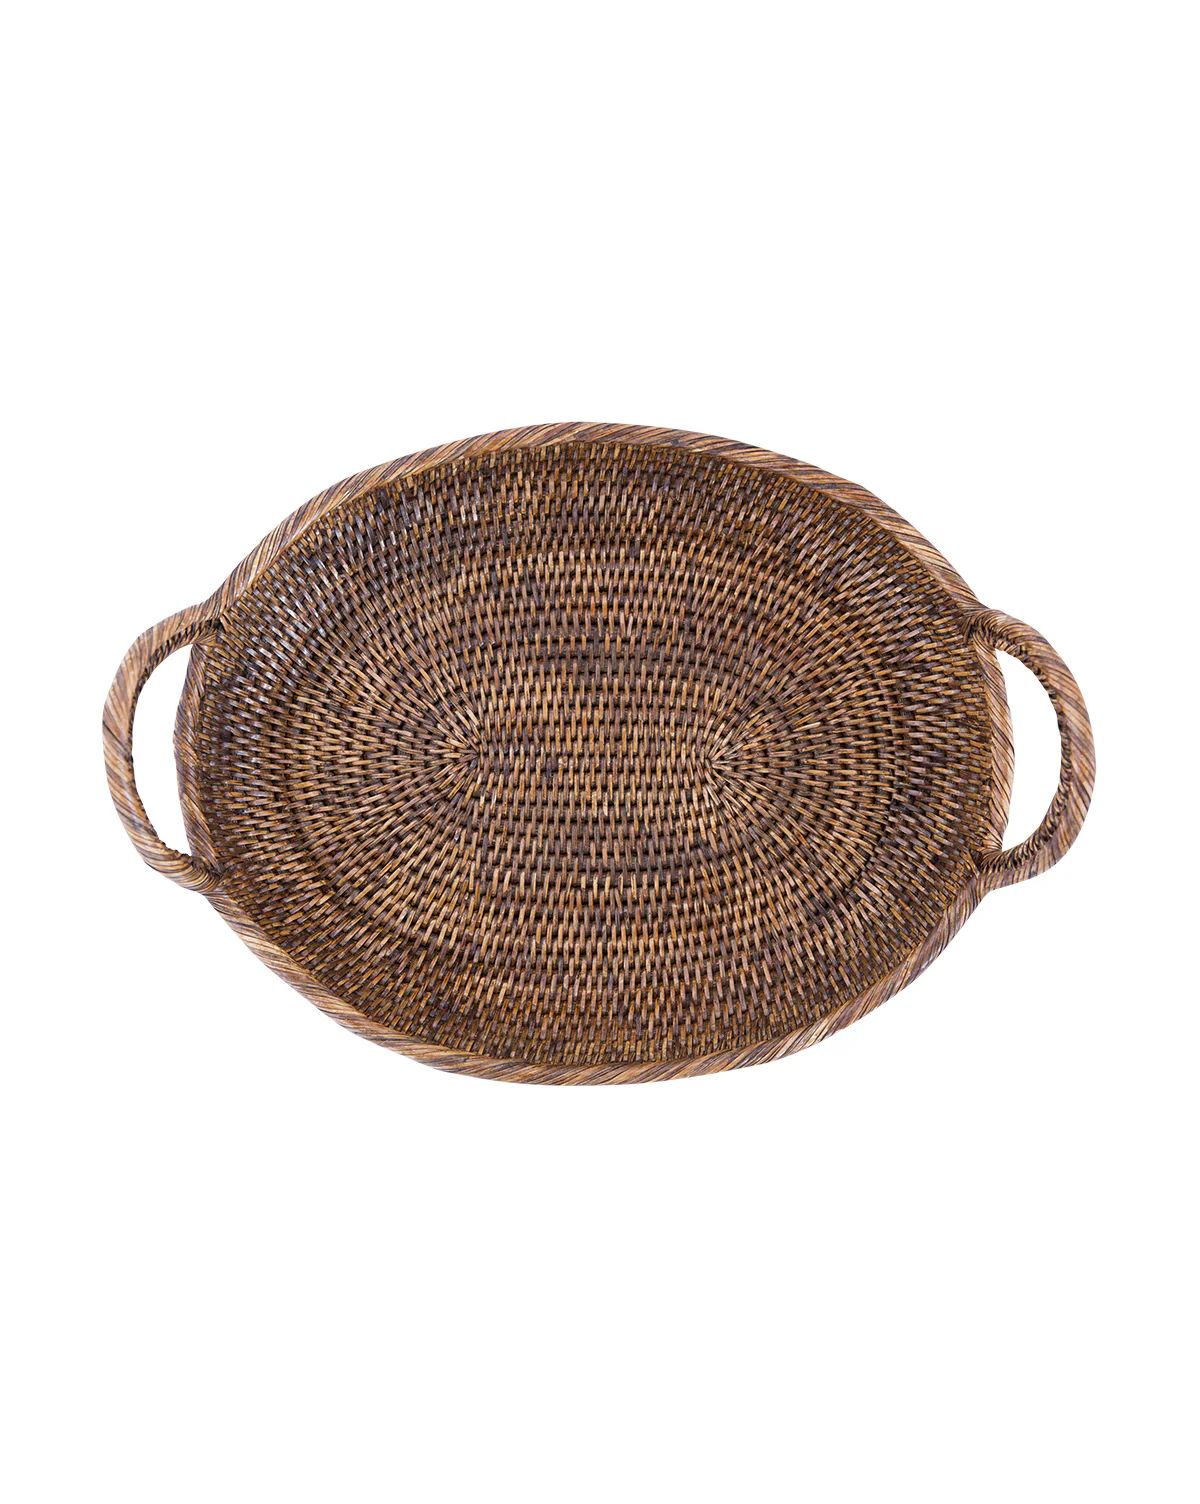 Oval Rattan Tray | McGee & Co.